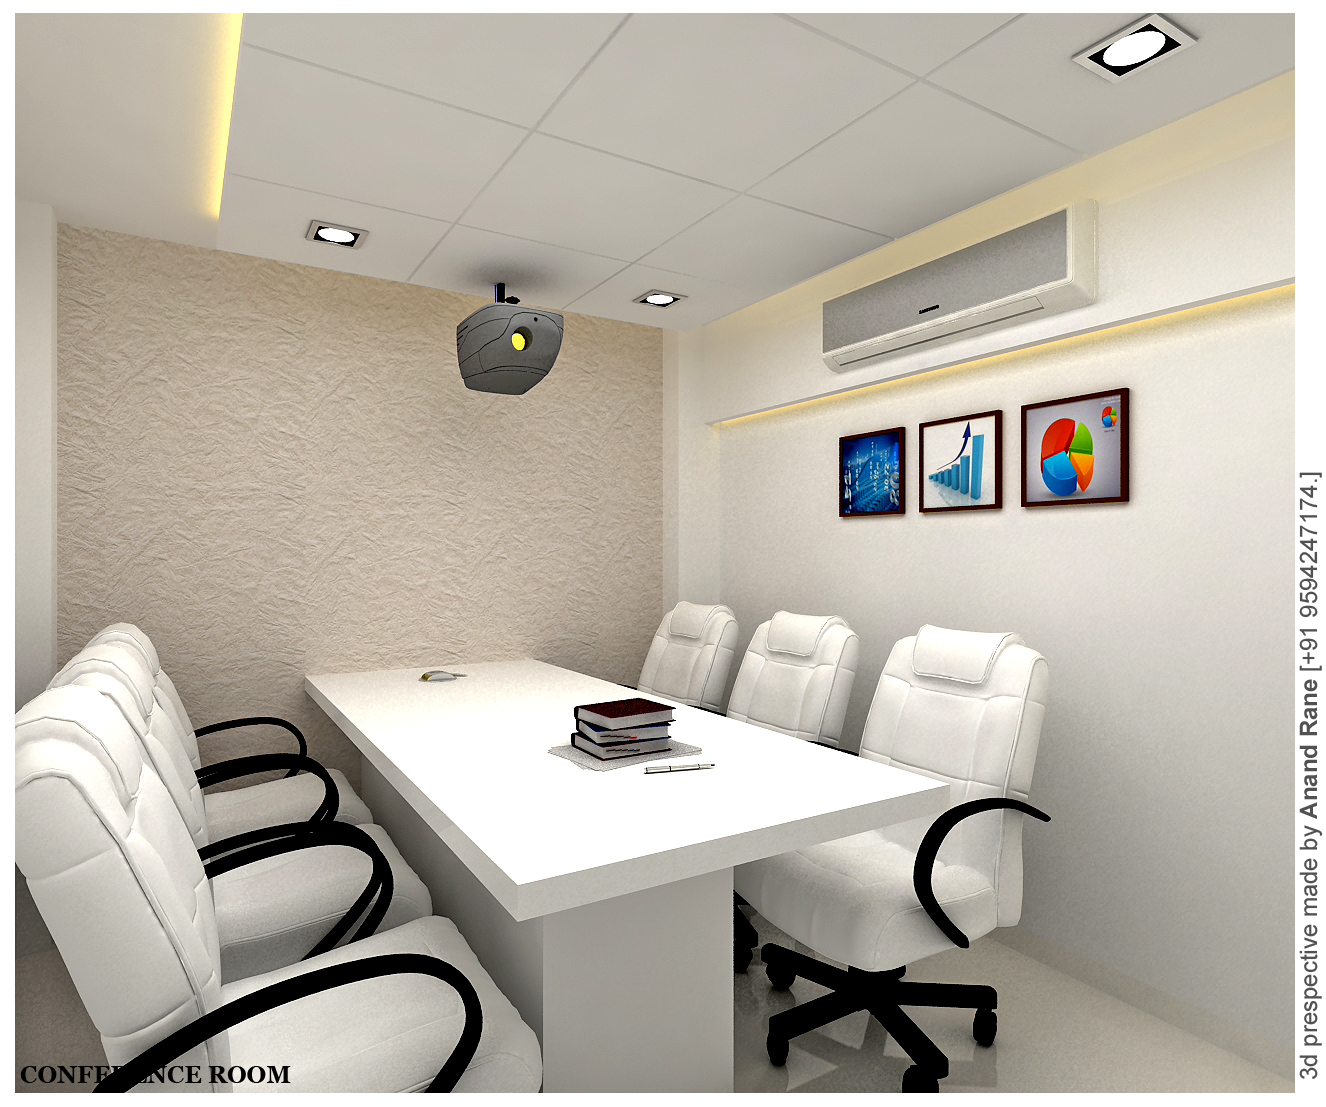 Commercial Interior Design - Conference Room P2Pic1